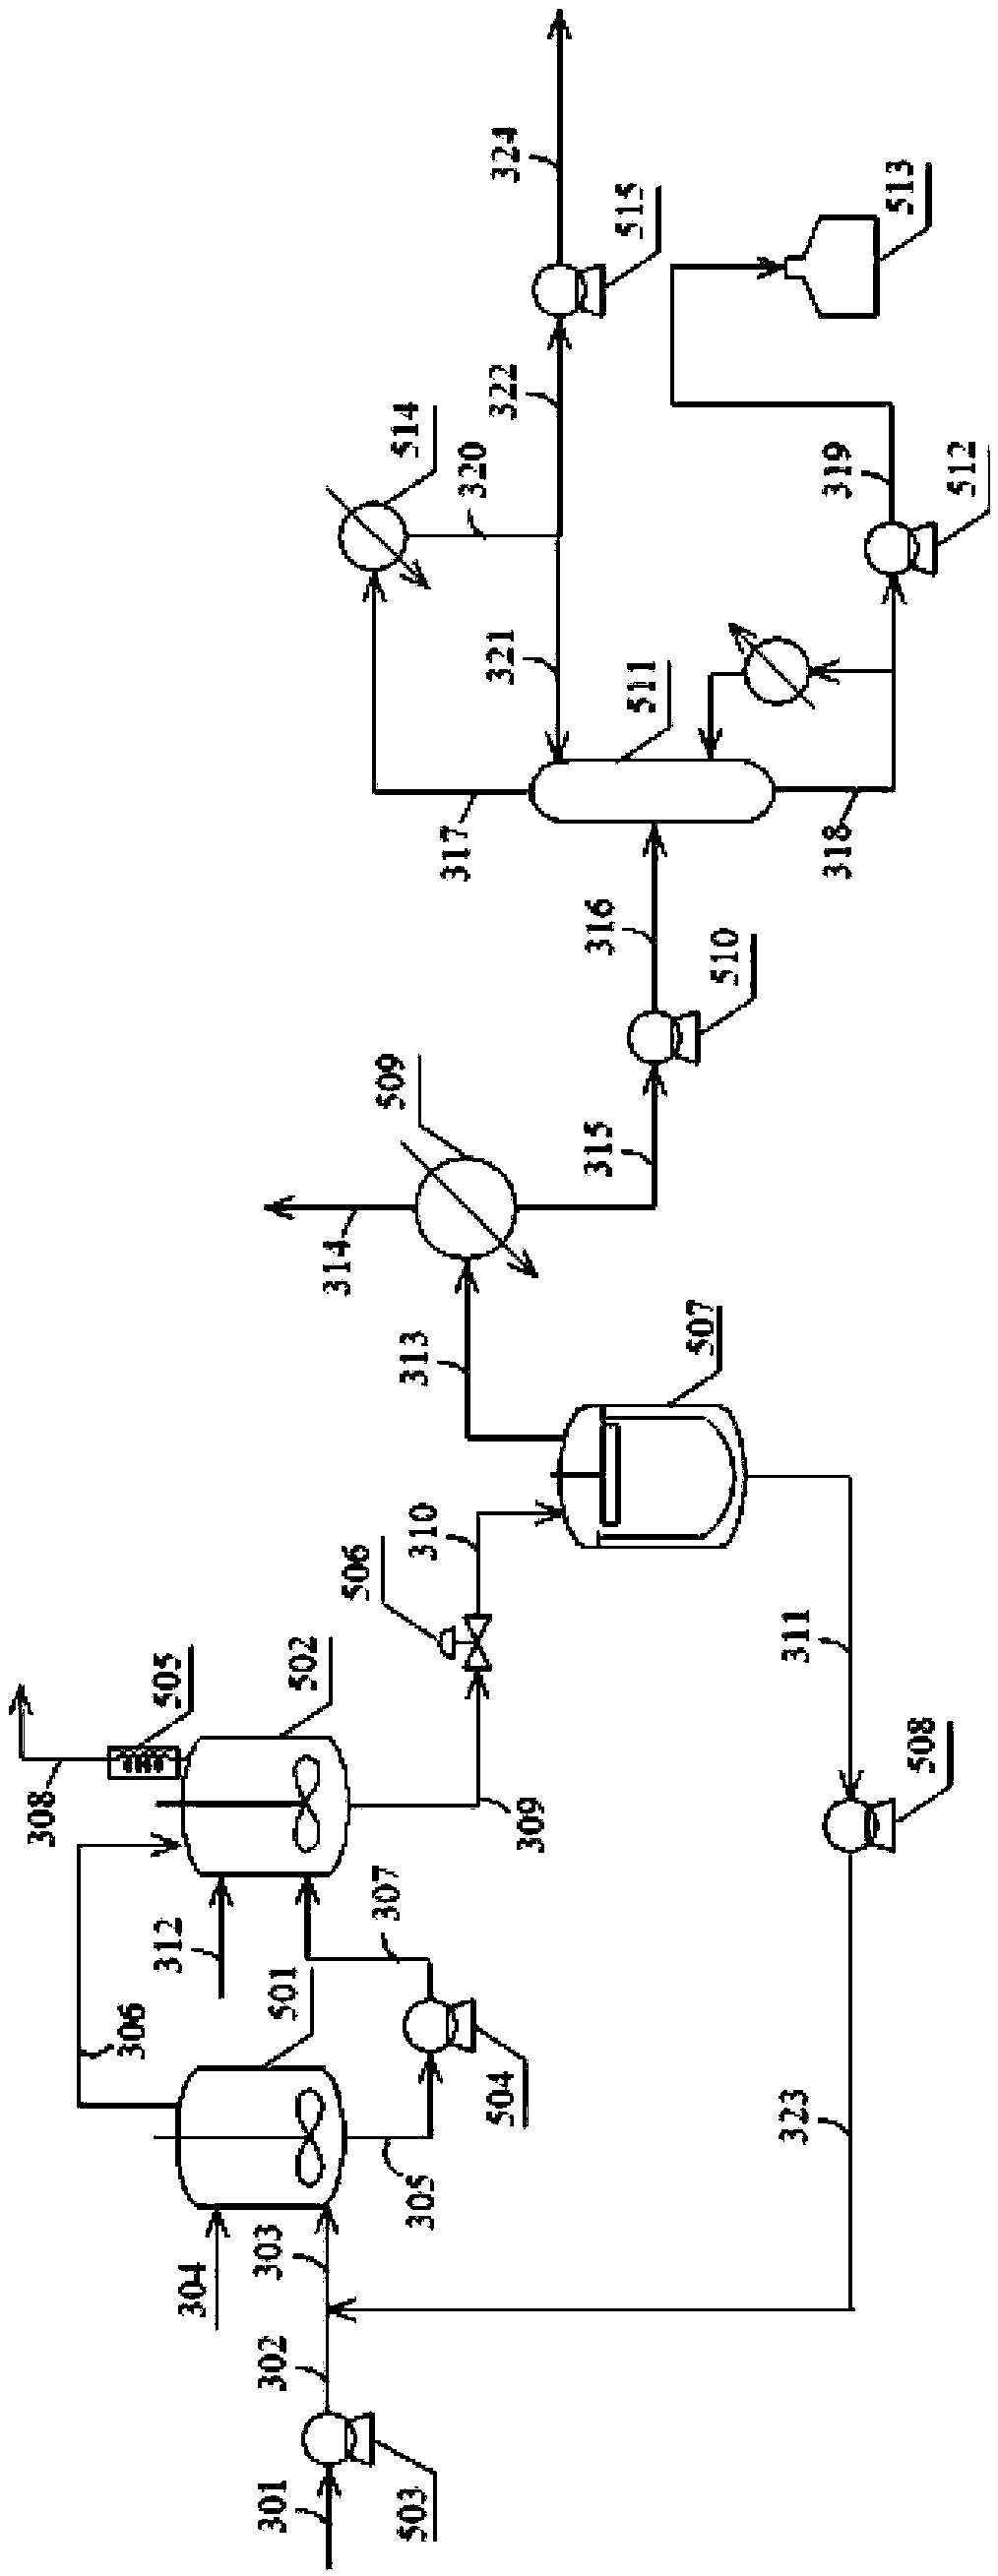 Method of conducting hydroformylation reaction on C4 mixture to prepare aldehydes